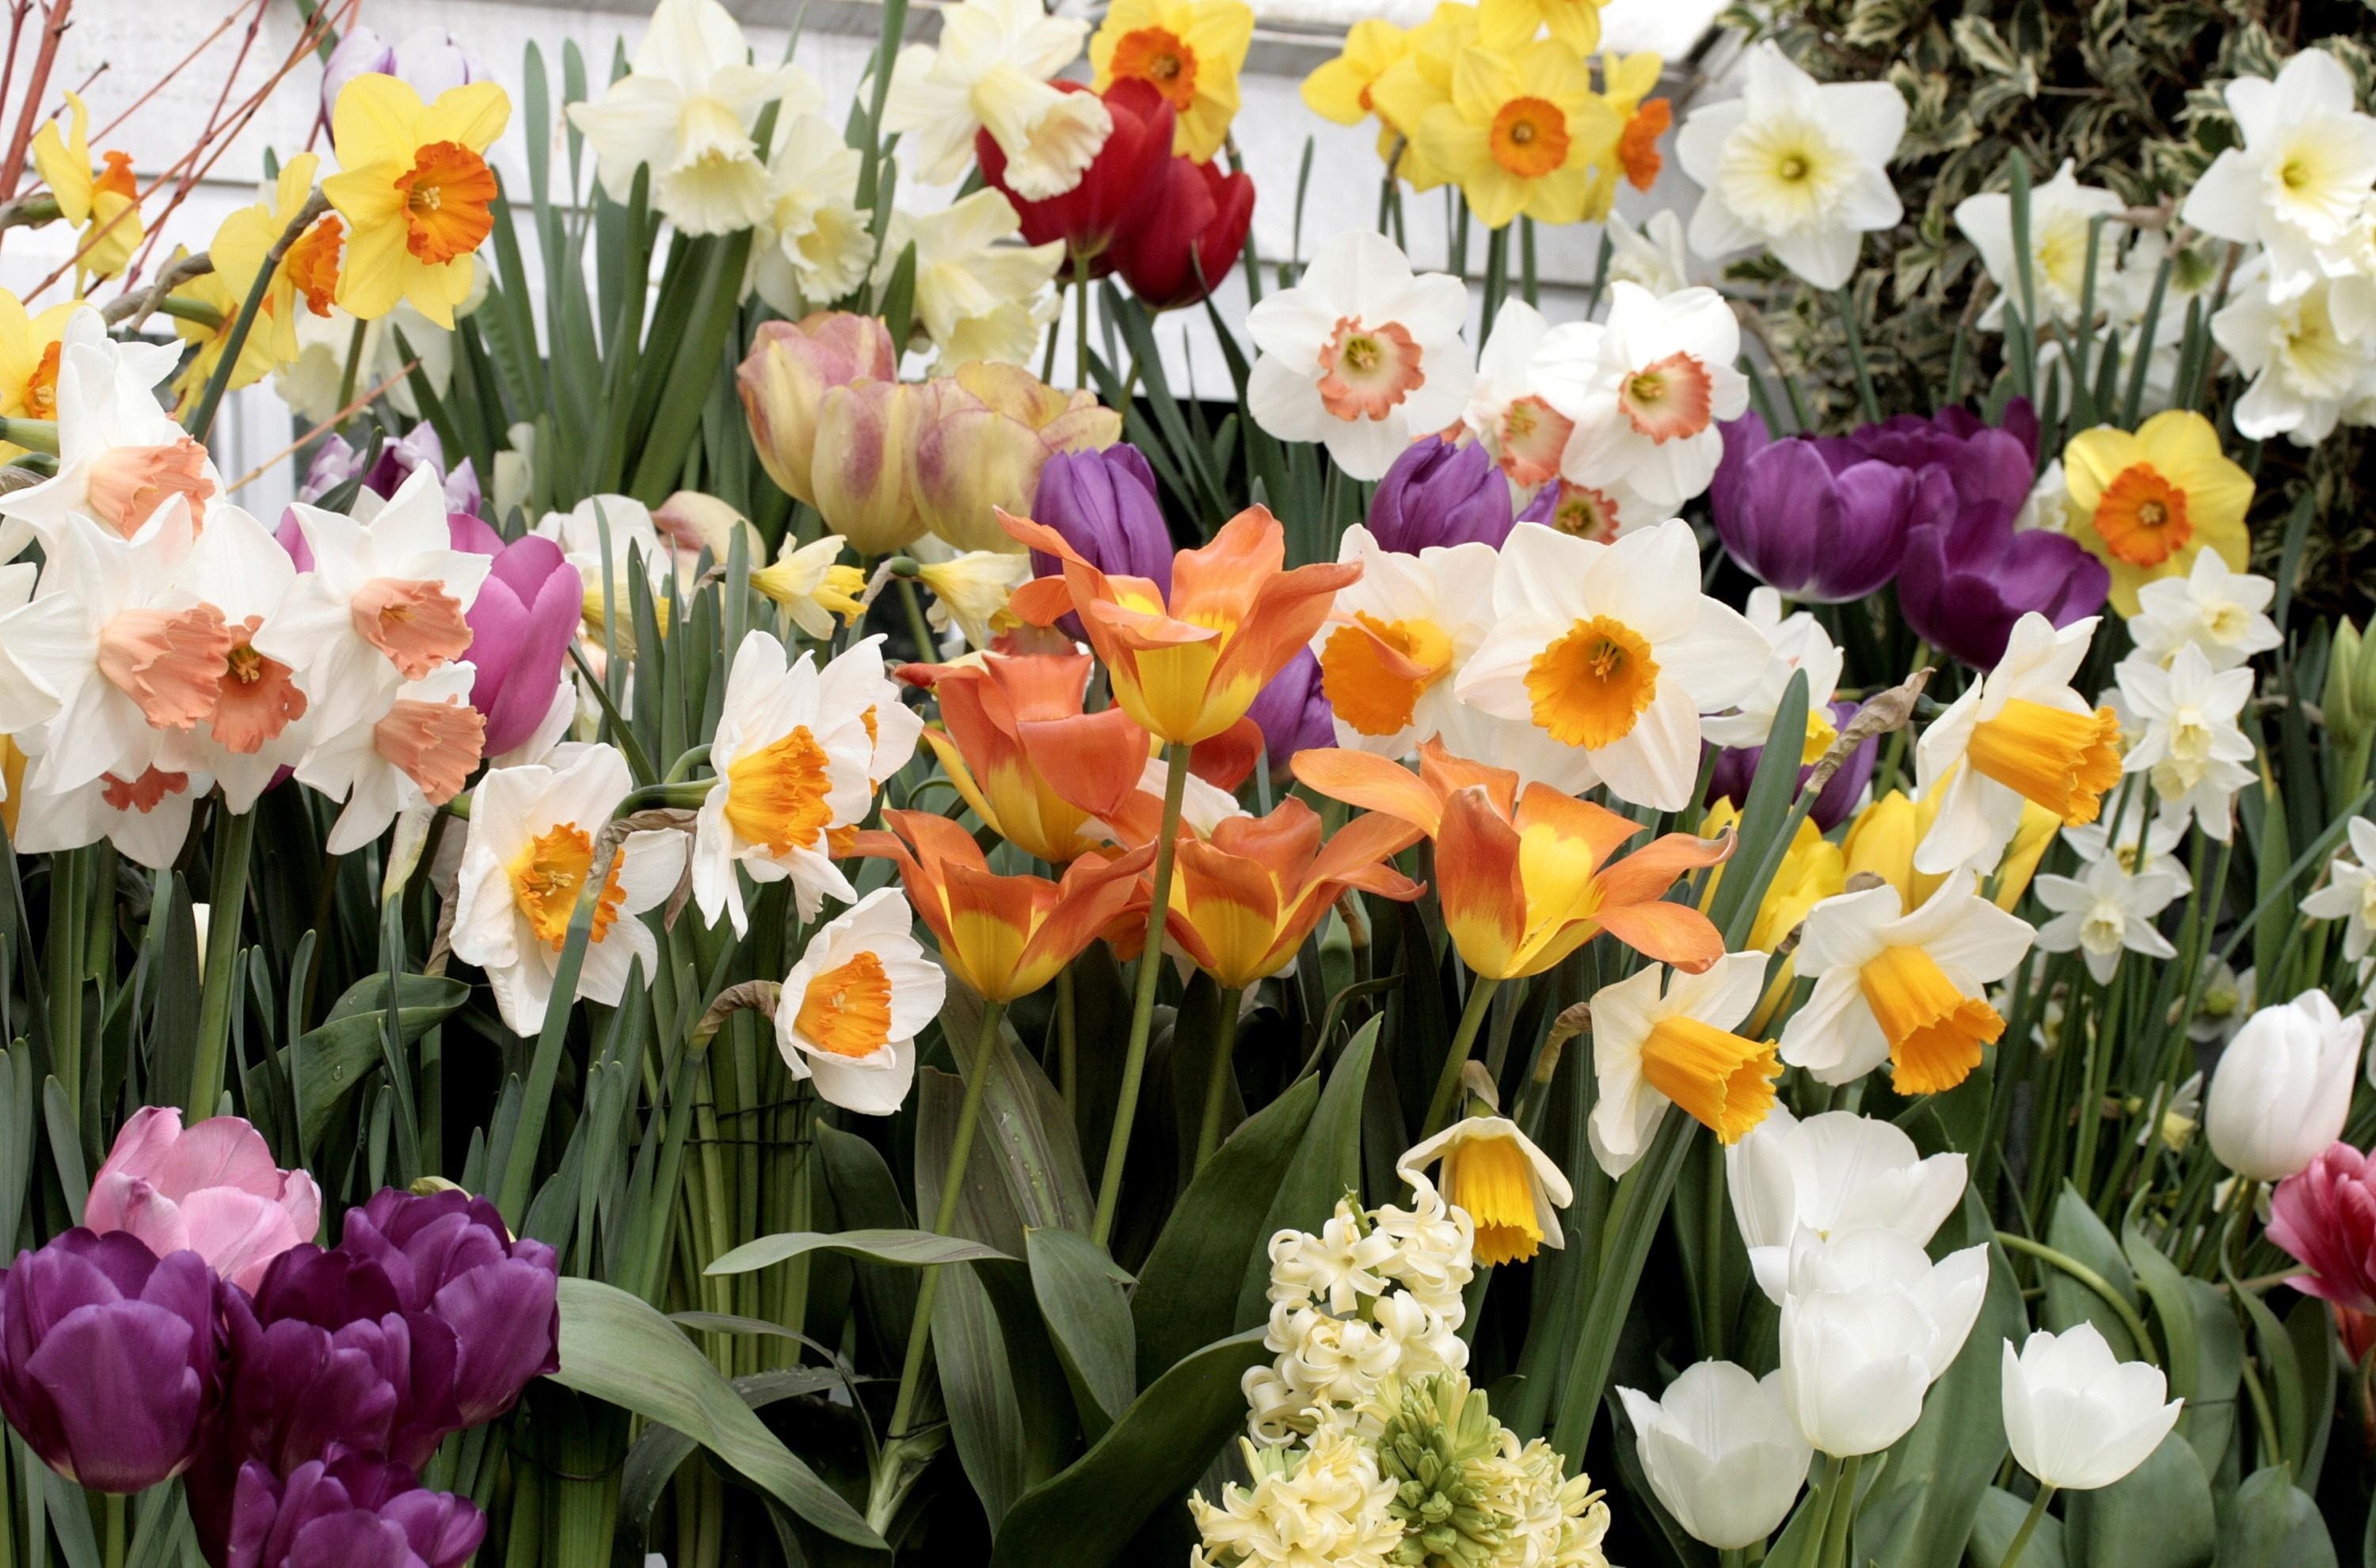 flowers, tulips, narcissussi, hyacinth, flower bed, flowerbed, lots of, multitude